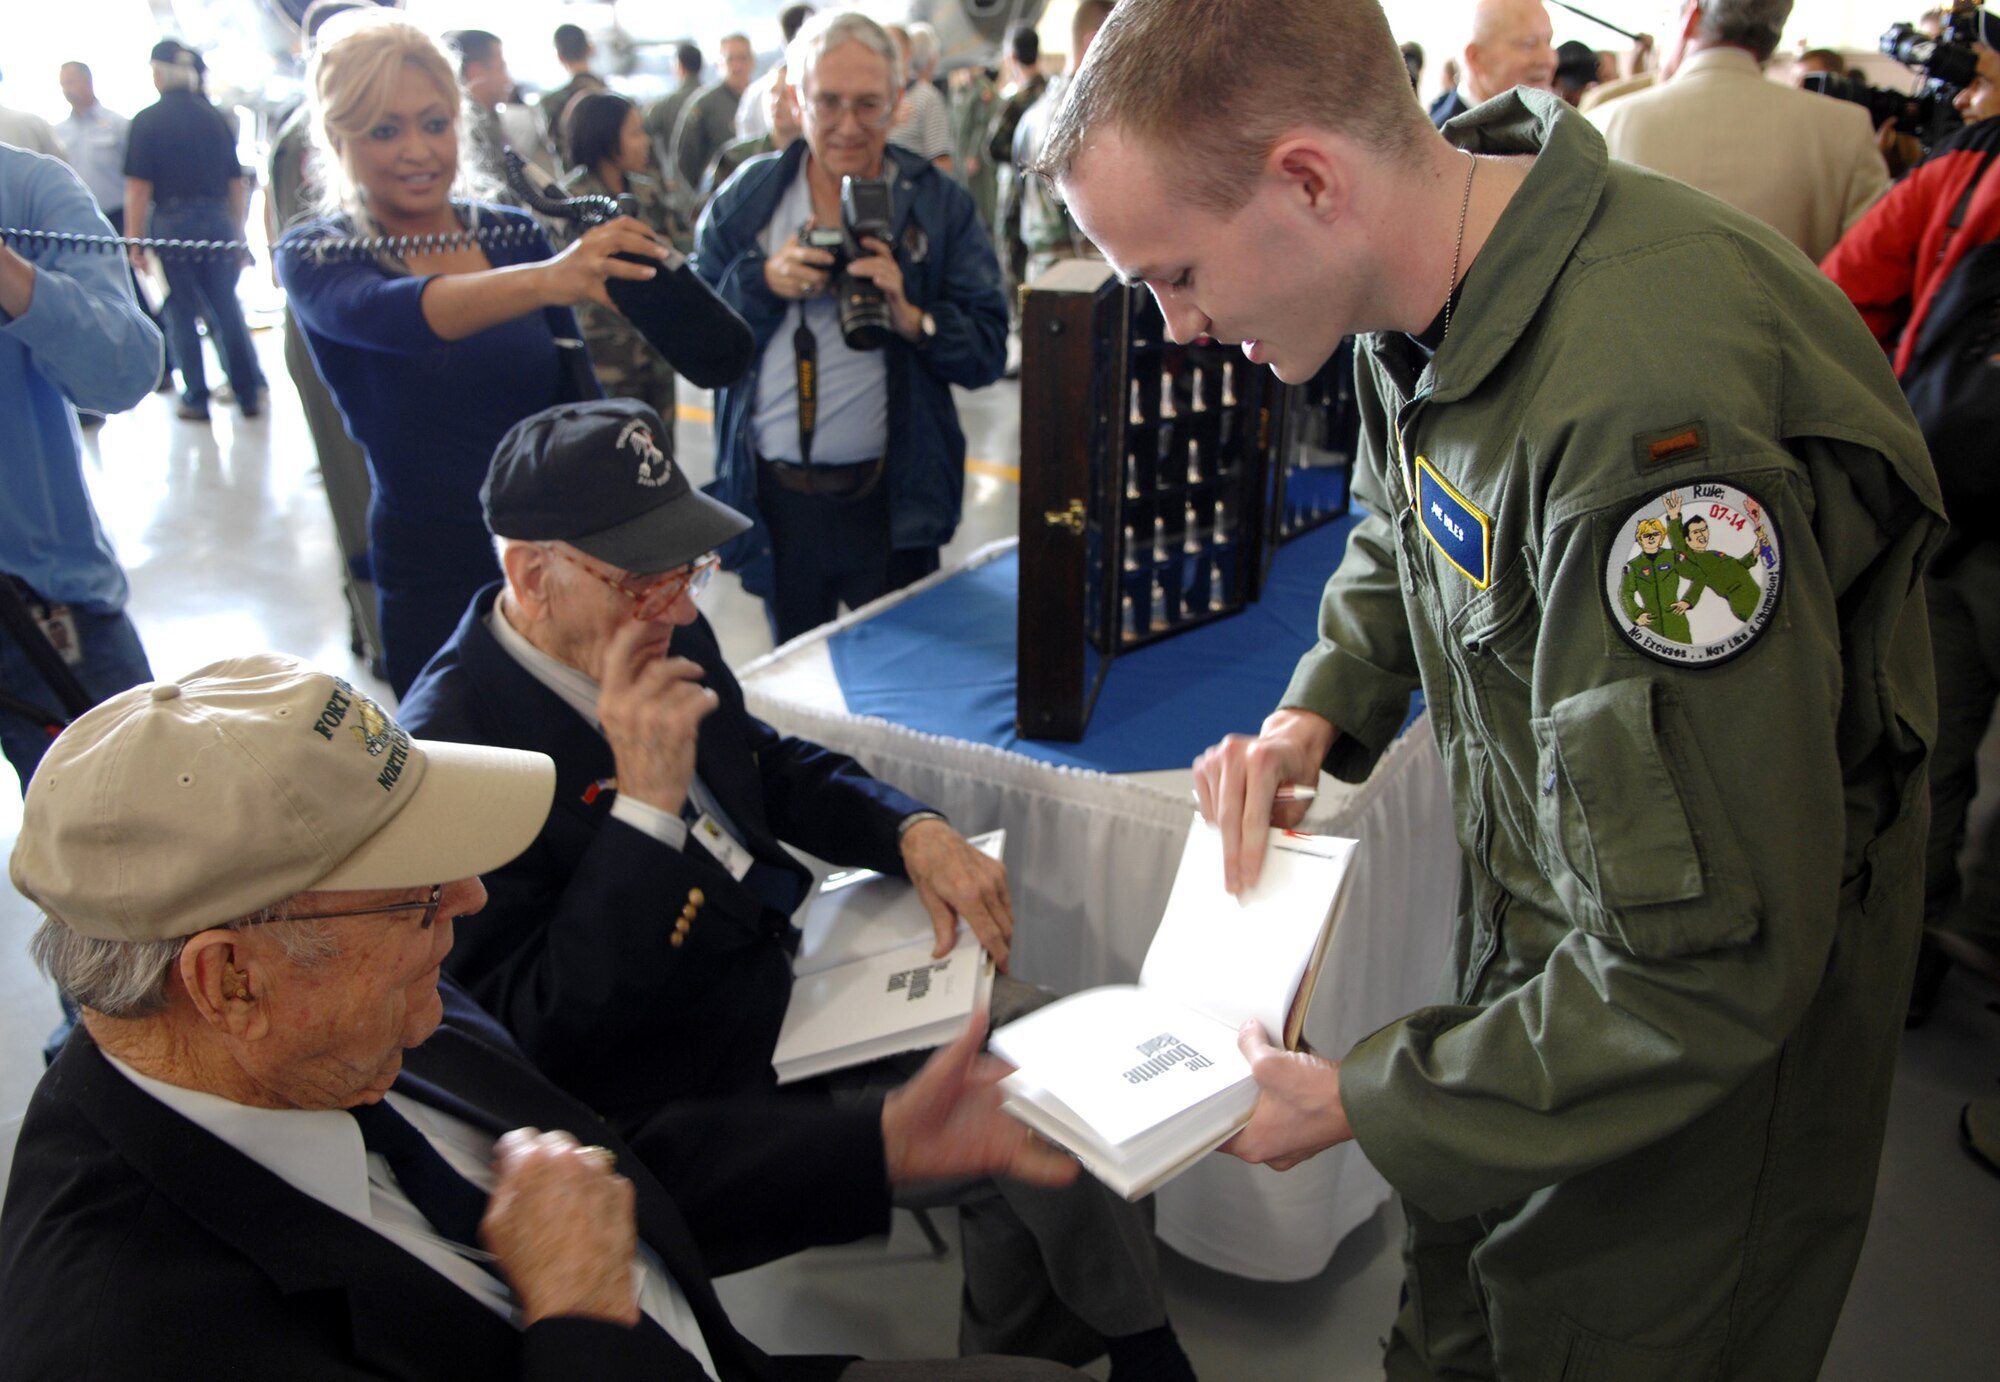 Second Lt. Joe Biles gets his books signed by Doolittle Raiders Robert Hite and Tom Griffin after a ceremony honoring the raiders and celebrating the 65th Anniversary of the raid April 17 at Randolph Air Force Base, Texas. Lieutenant Biles is with the 562nd Flying training squadron at Randolph AFB. The Doolittle Raiders flew B-25 Mitchell bombers over Japan April 18, 1942, just four months after Pearl Harbor. (U.S. Air Force photo/Staff Sgt. Brian Ferguson)